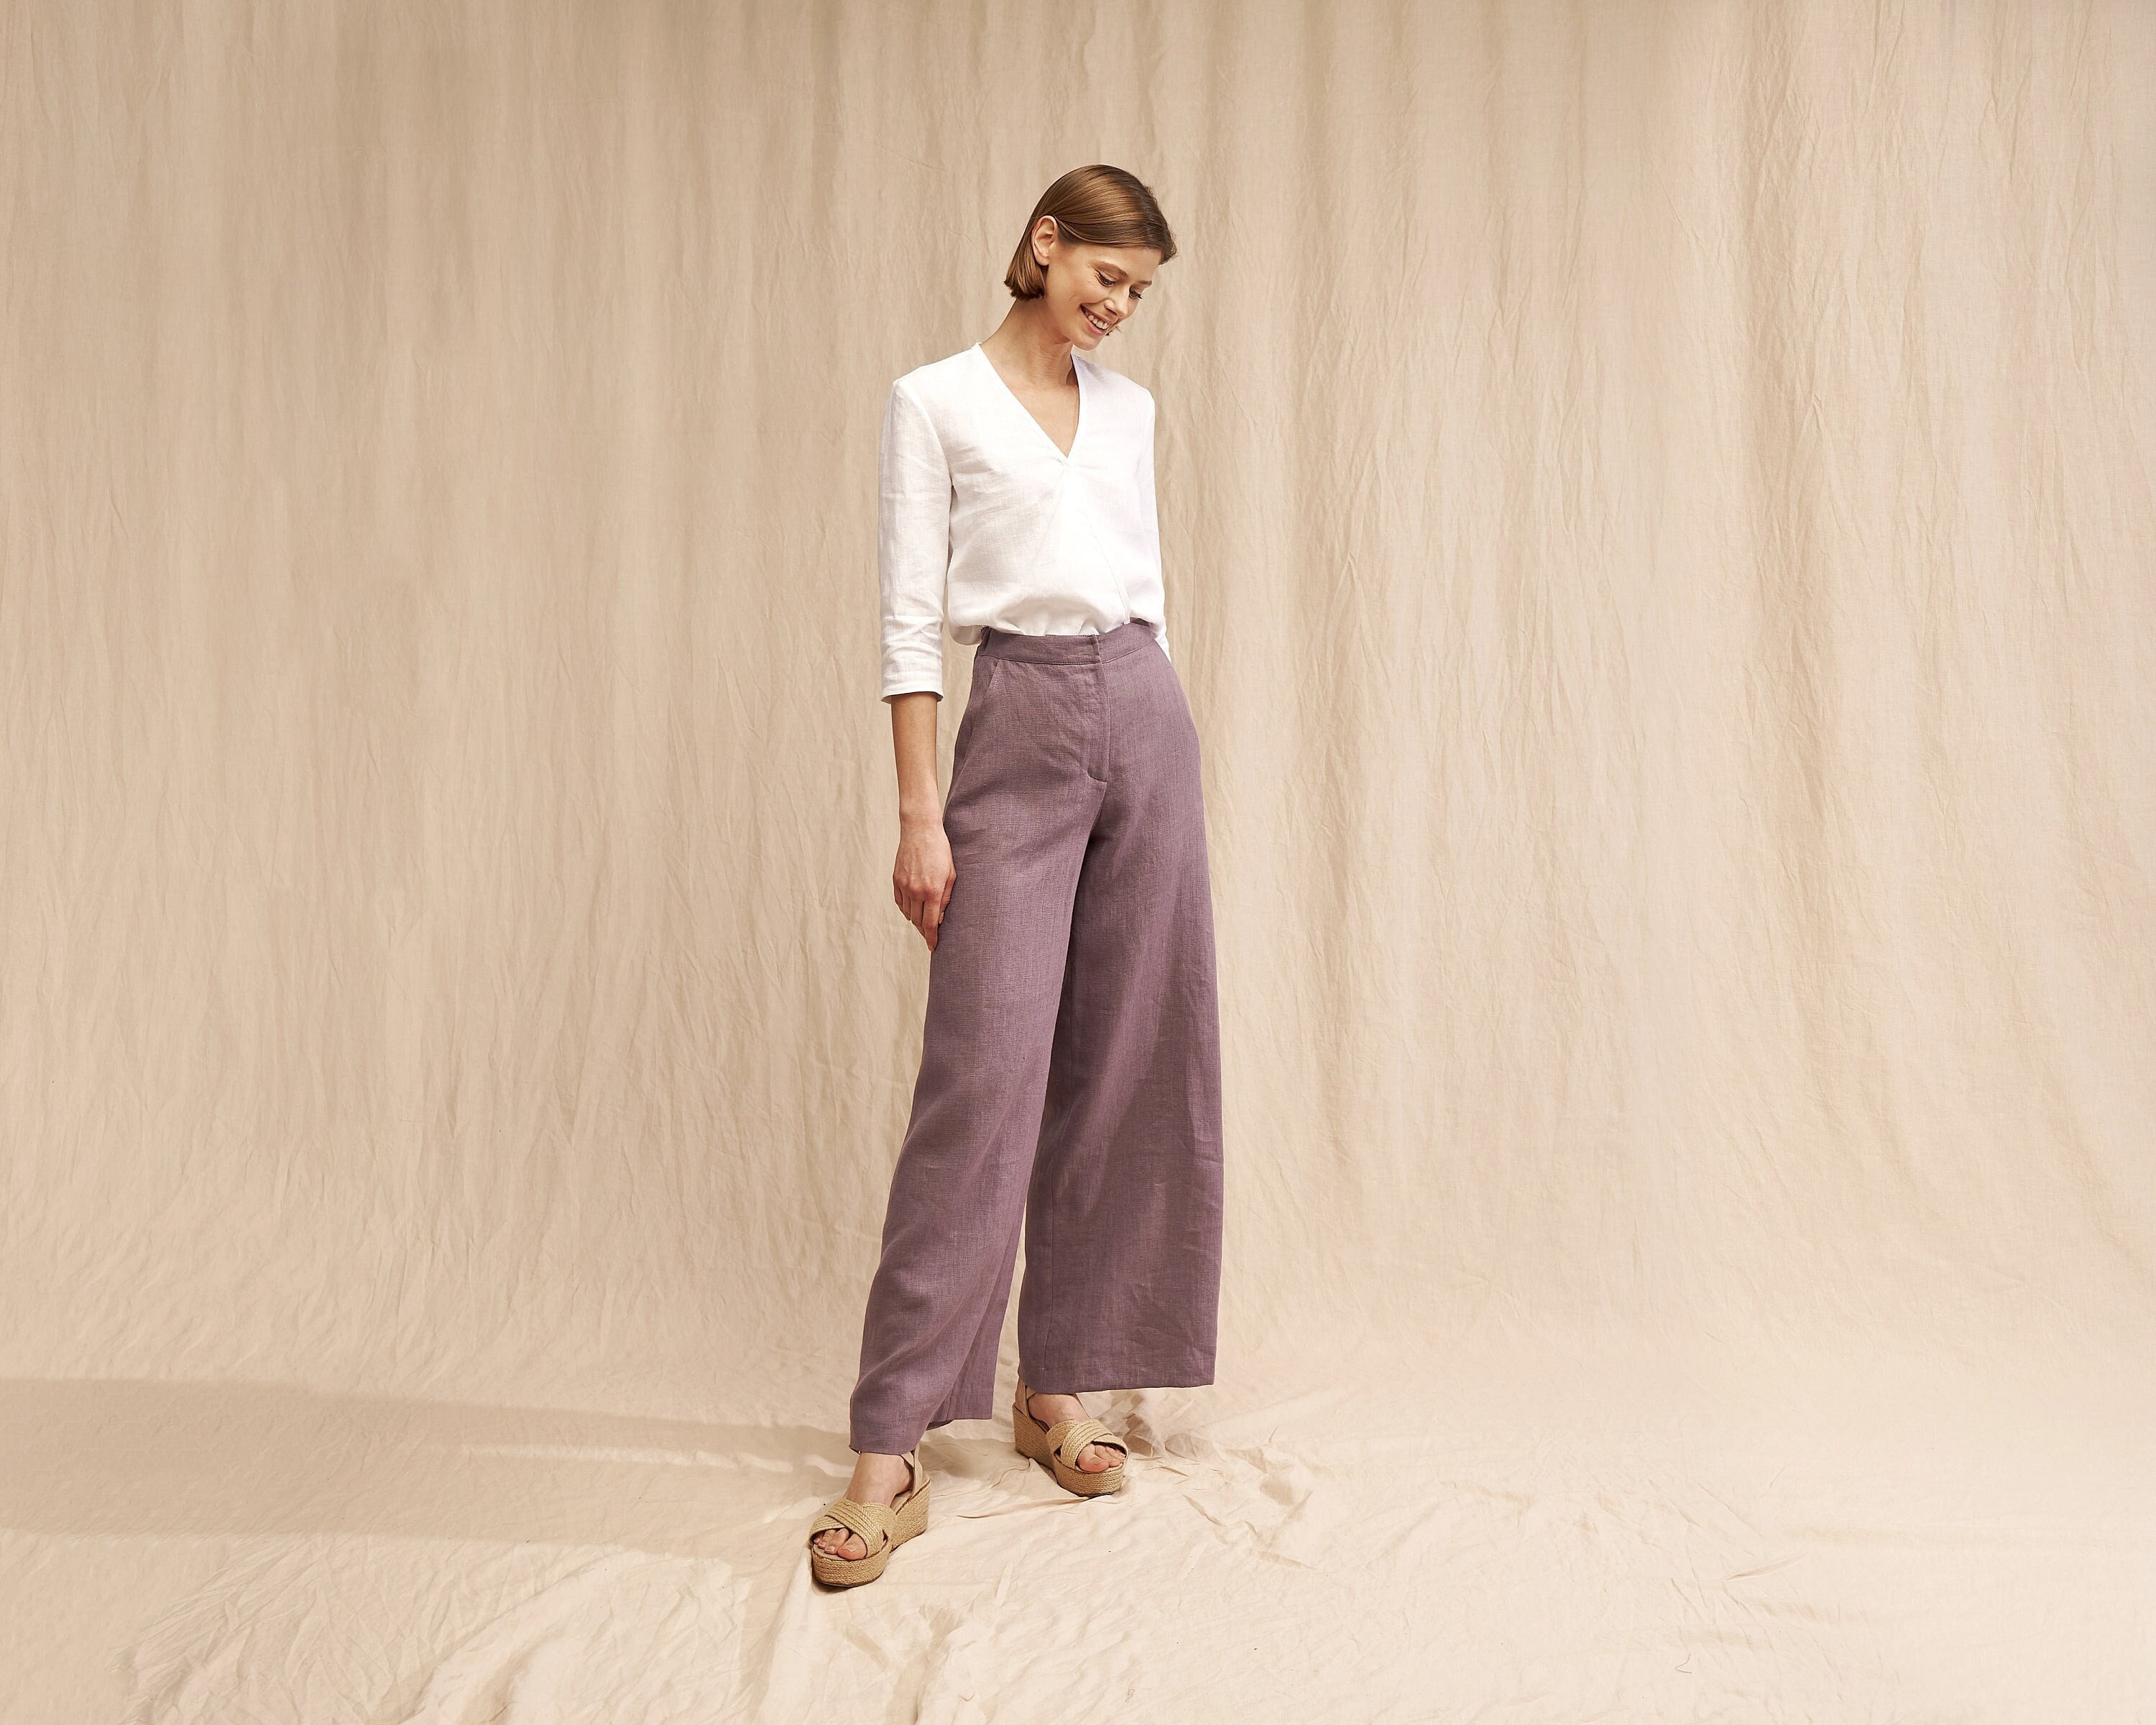 Buy Linen PALAZZO Pants, 28, 30, 32, 34 Inches Inseam Options